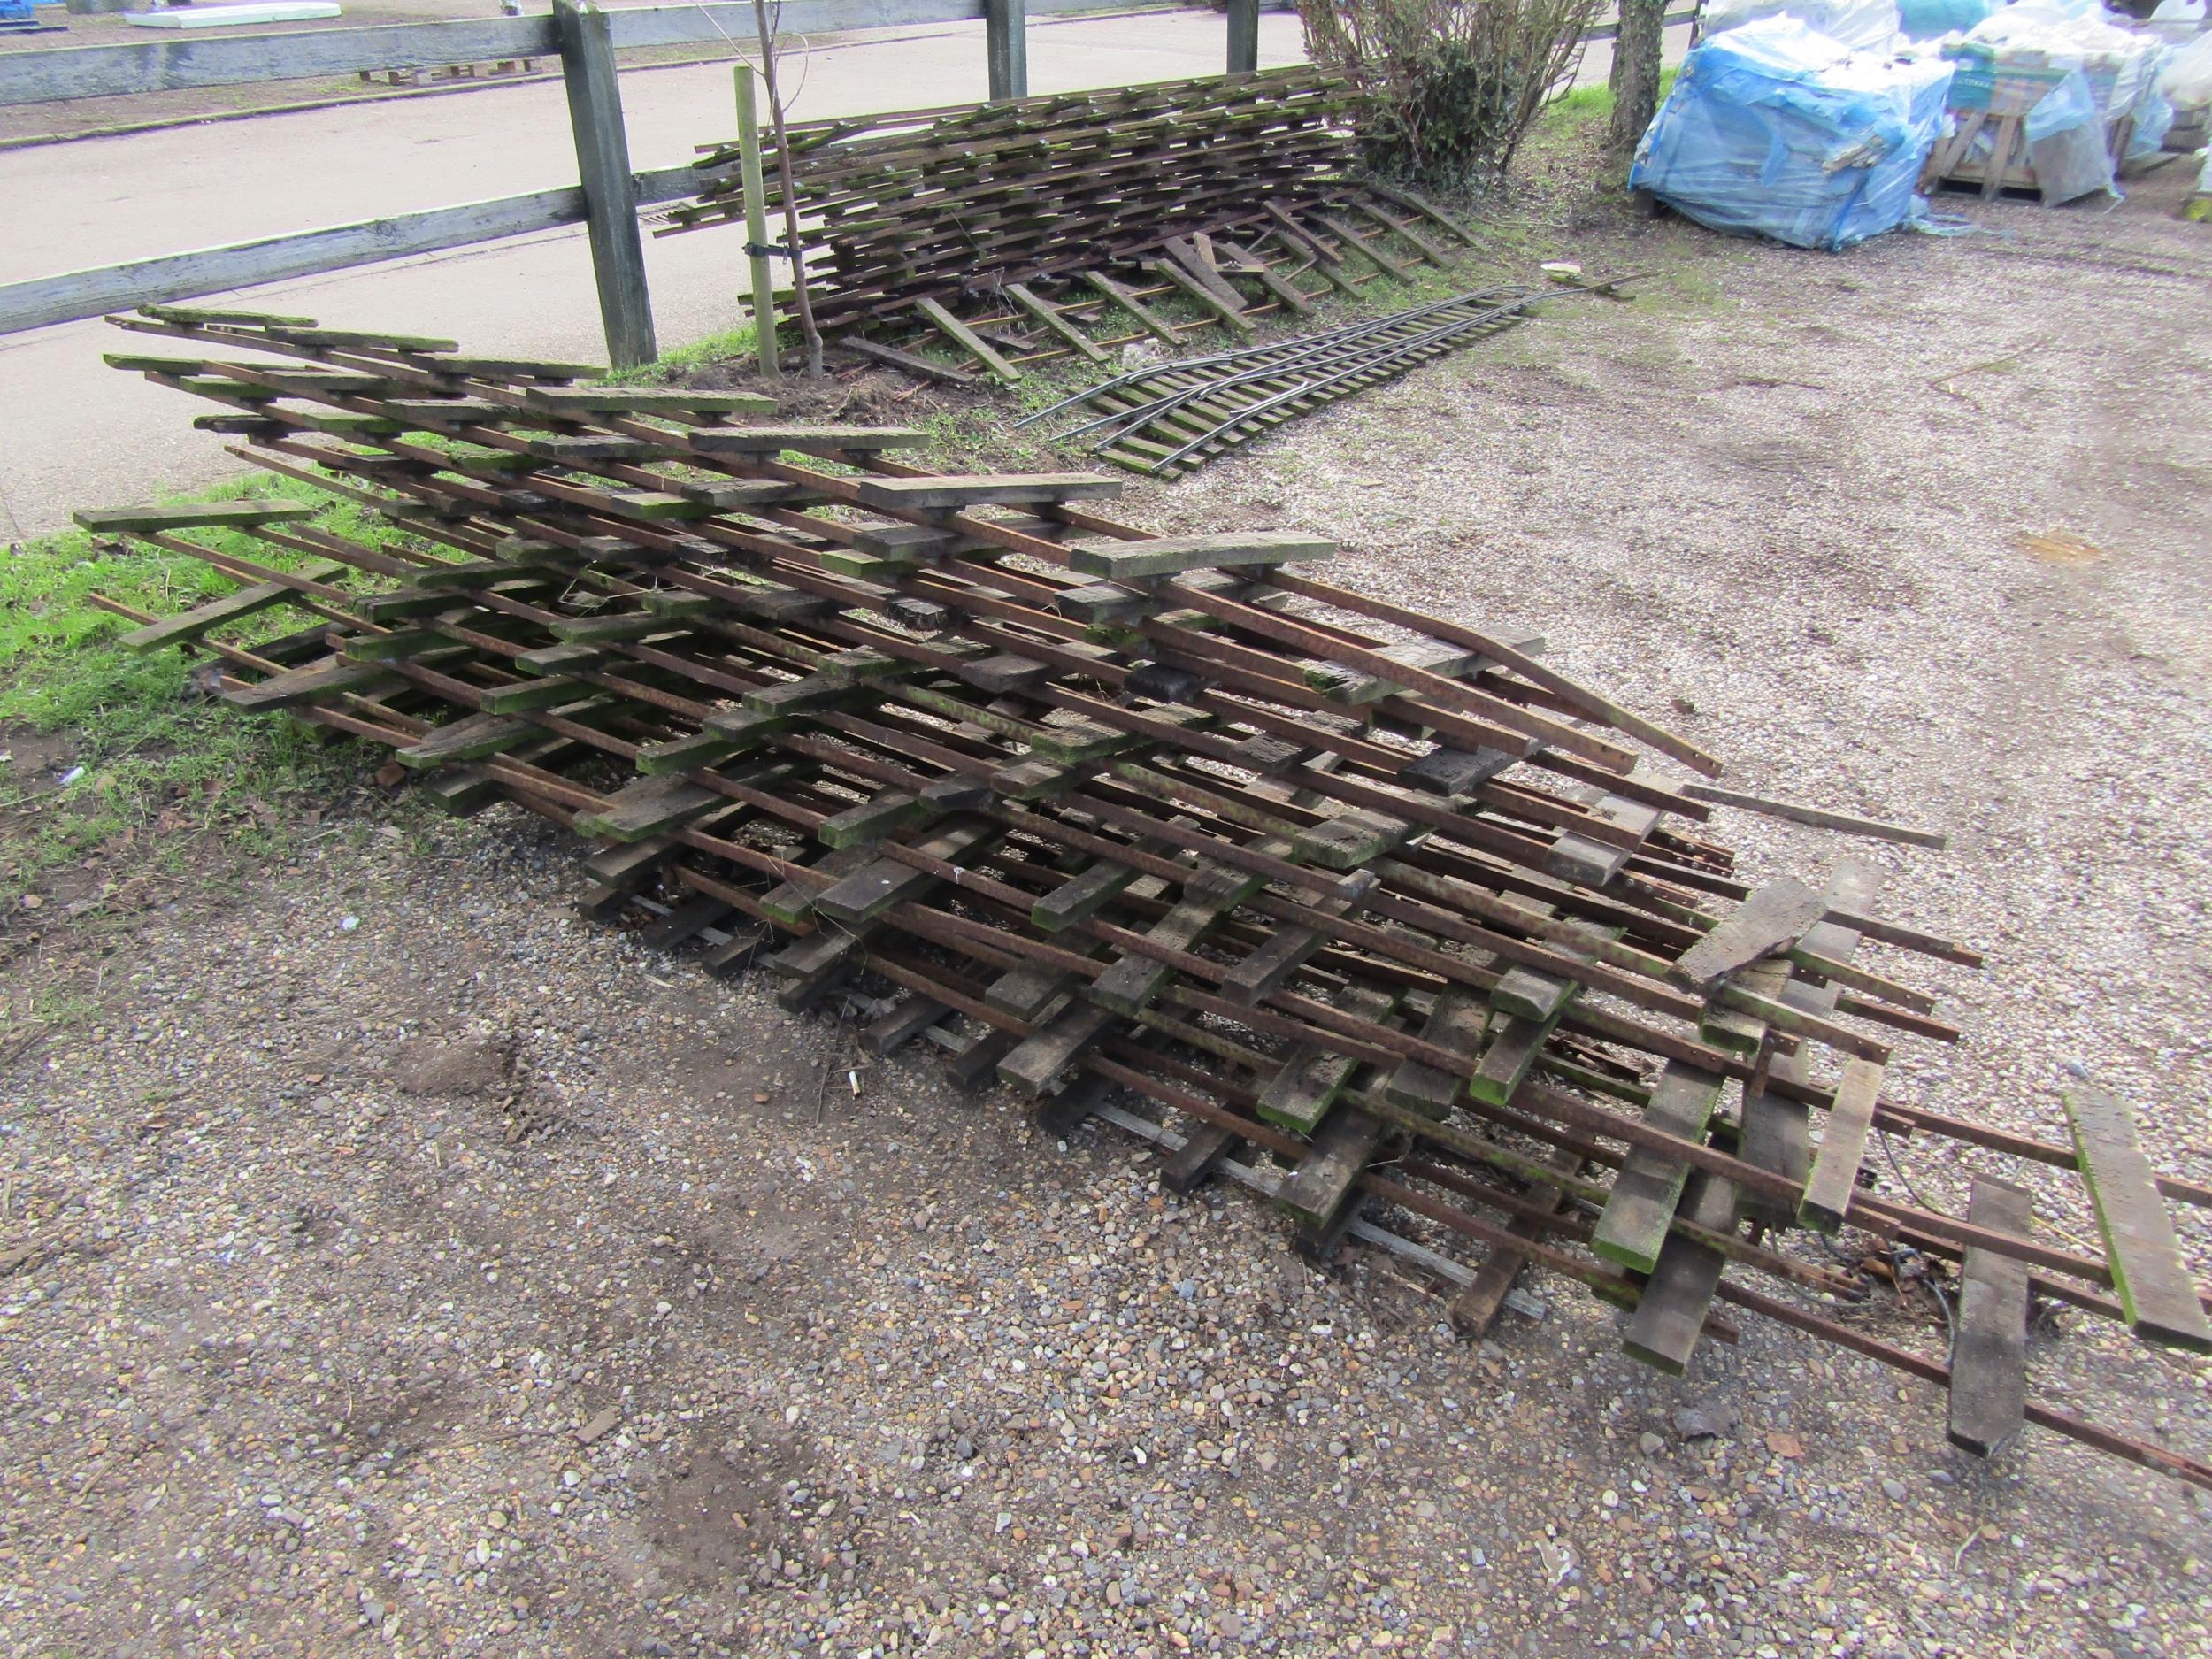 A good quantity of 7 1/4" gauge miniature railway track. Approximately 75 metres in total, divided